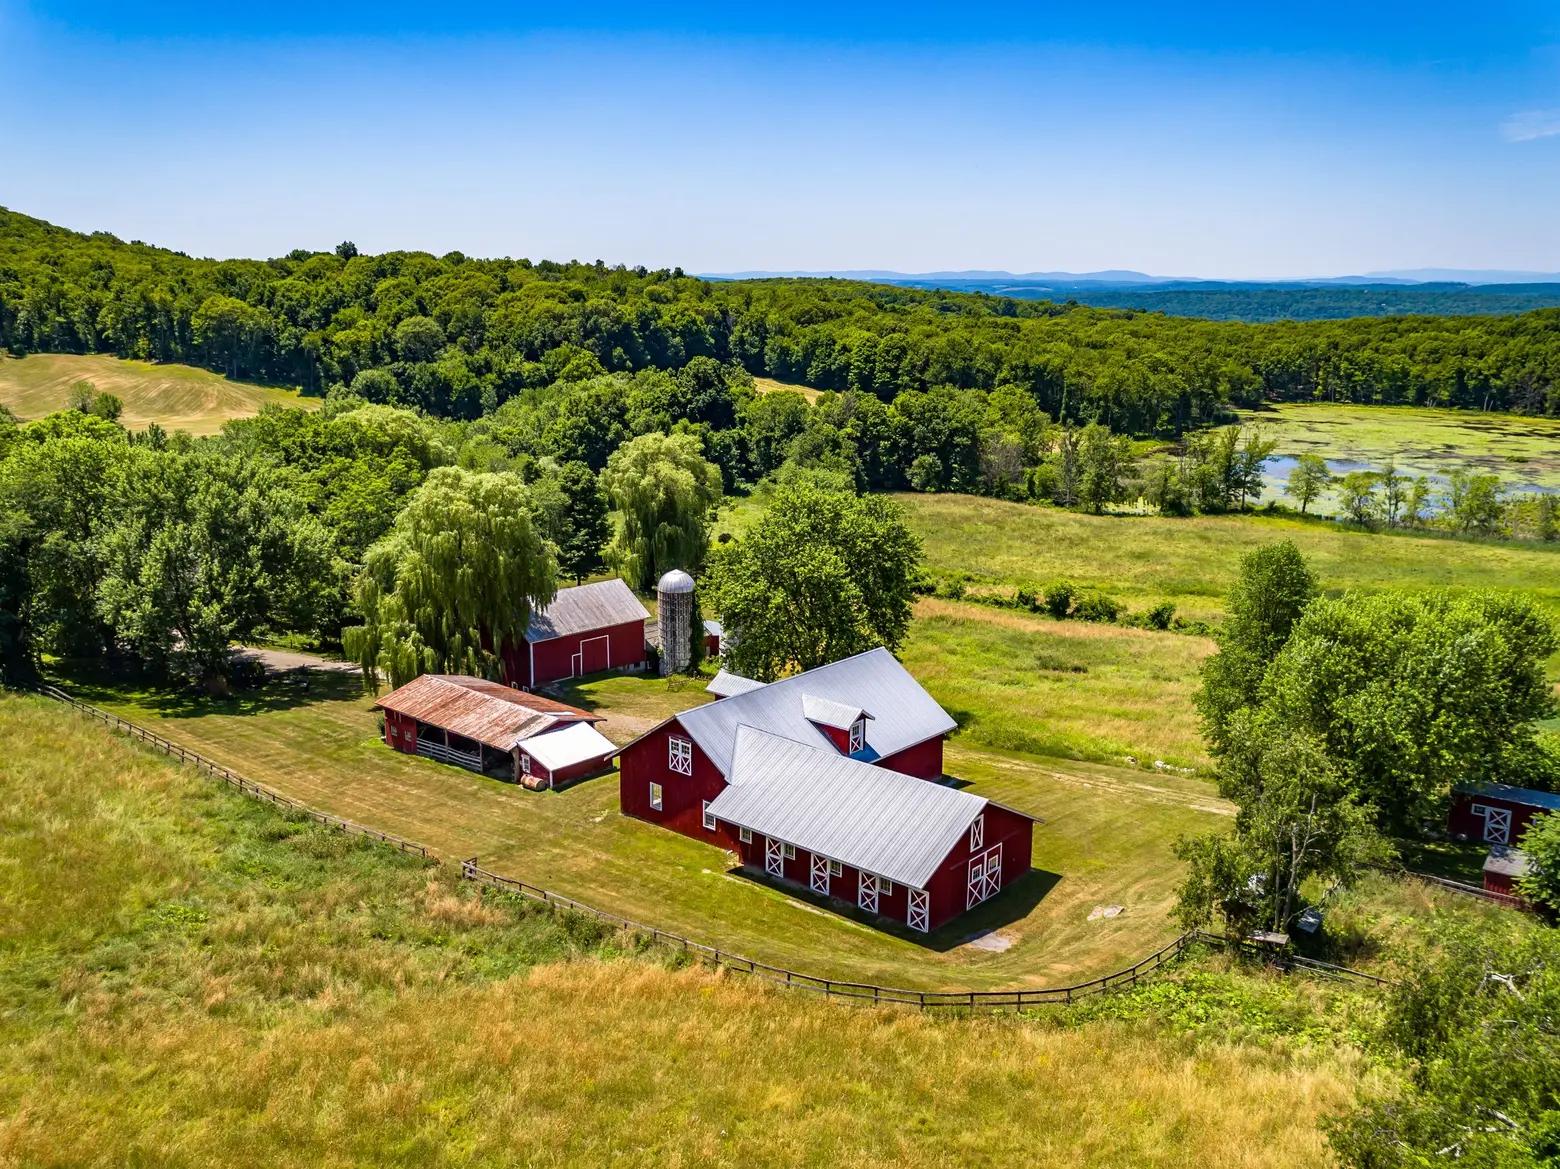 For $1.95M, this 66-acre upstate farm comes with a rustic party barn and a private swimming hole